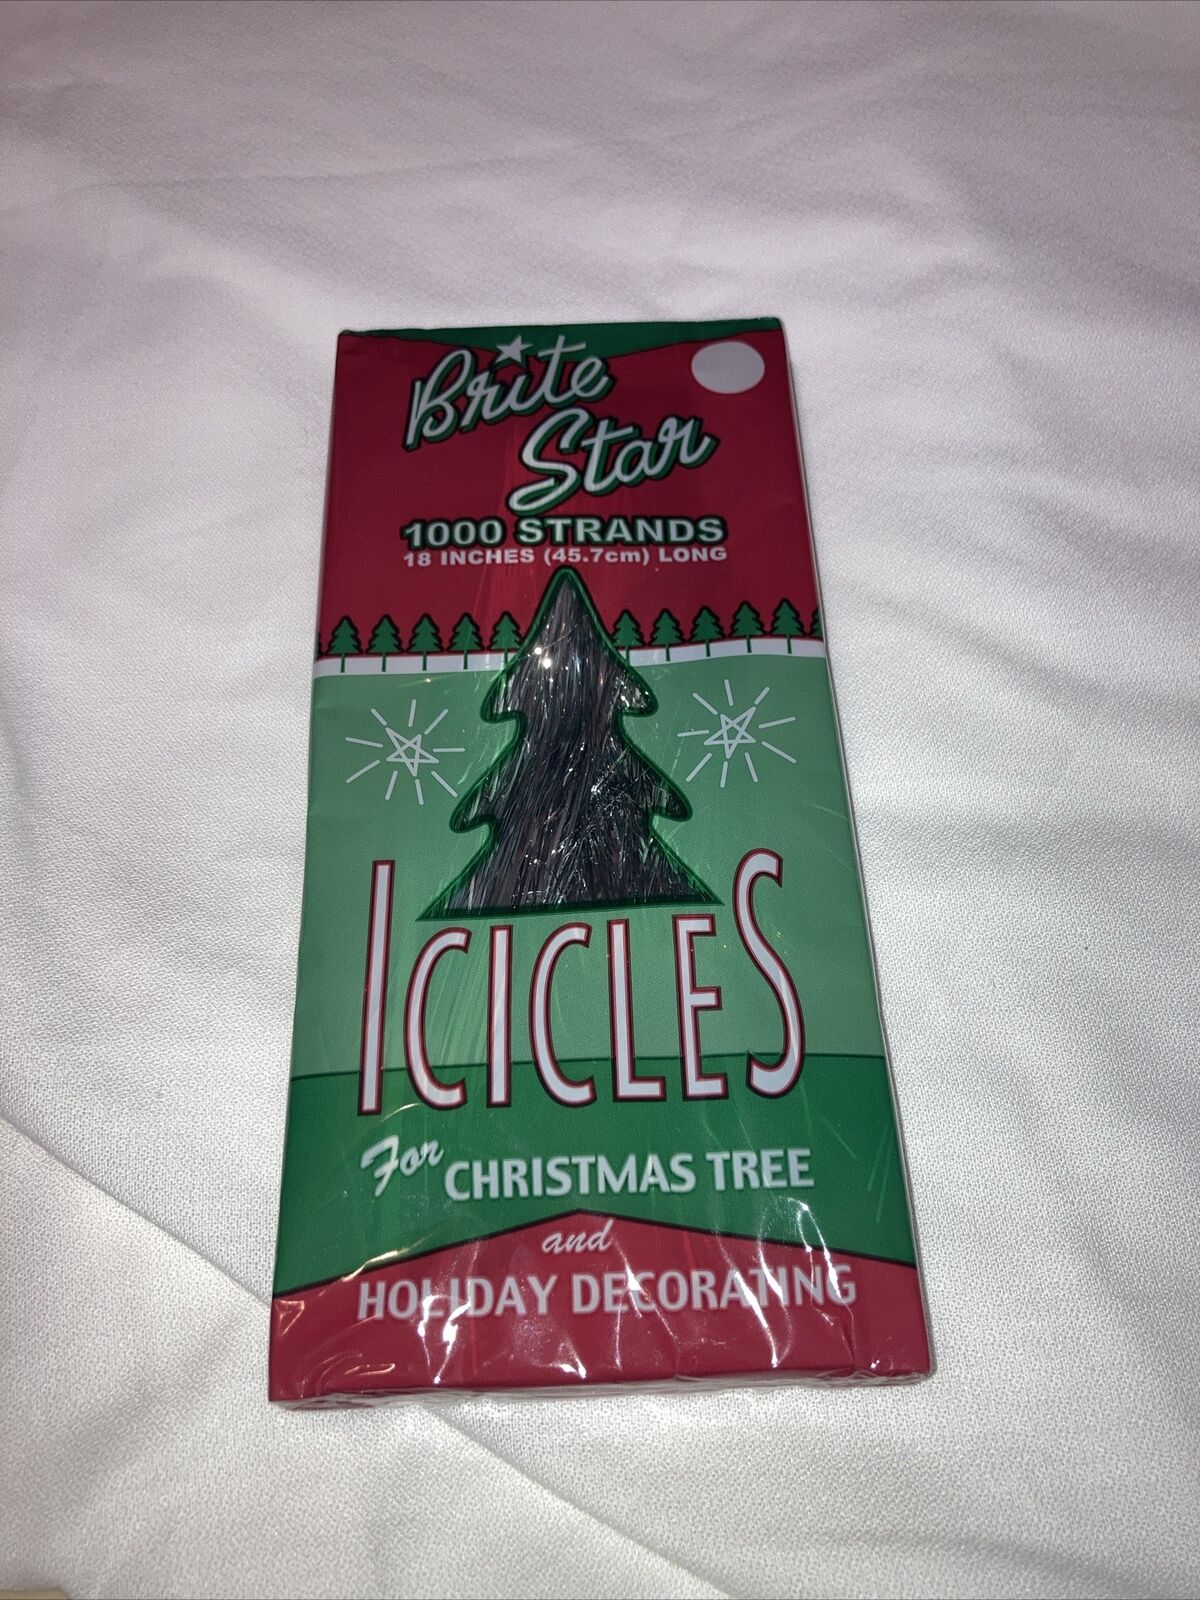 Brite Star Icicles 1000 Strands Christmas Tree Decorations Silver Tinsel  USA